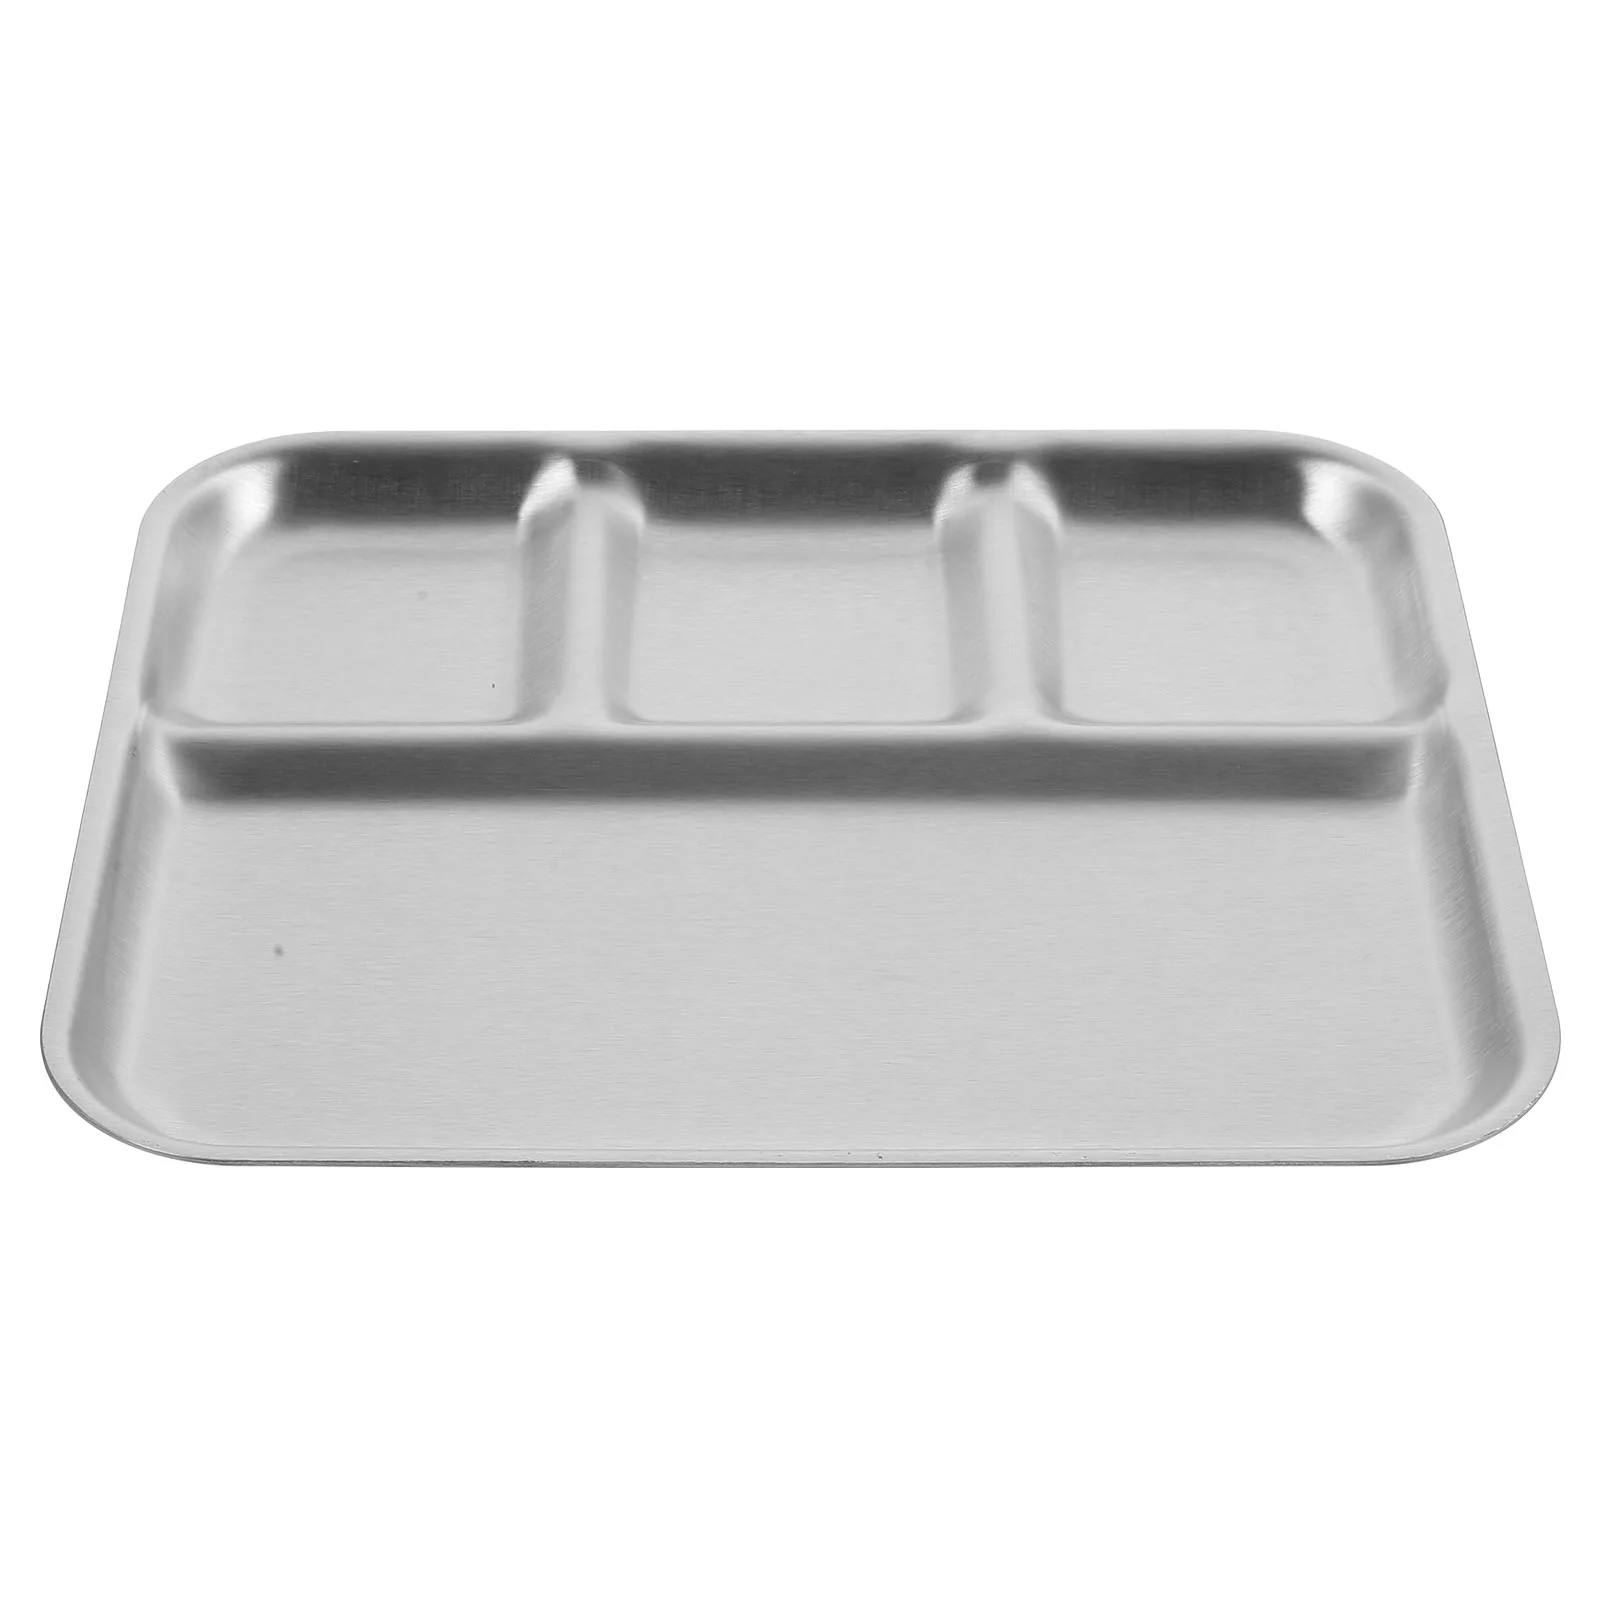 

Stainless Steel Grid Separated Eating Plate Divided Appetizer Tray Compartment Plates Reusable Dipping Dish Seasoning Serving